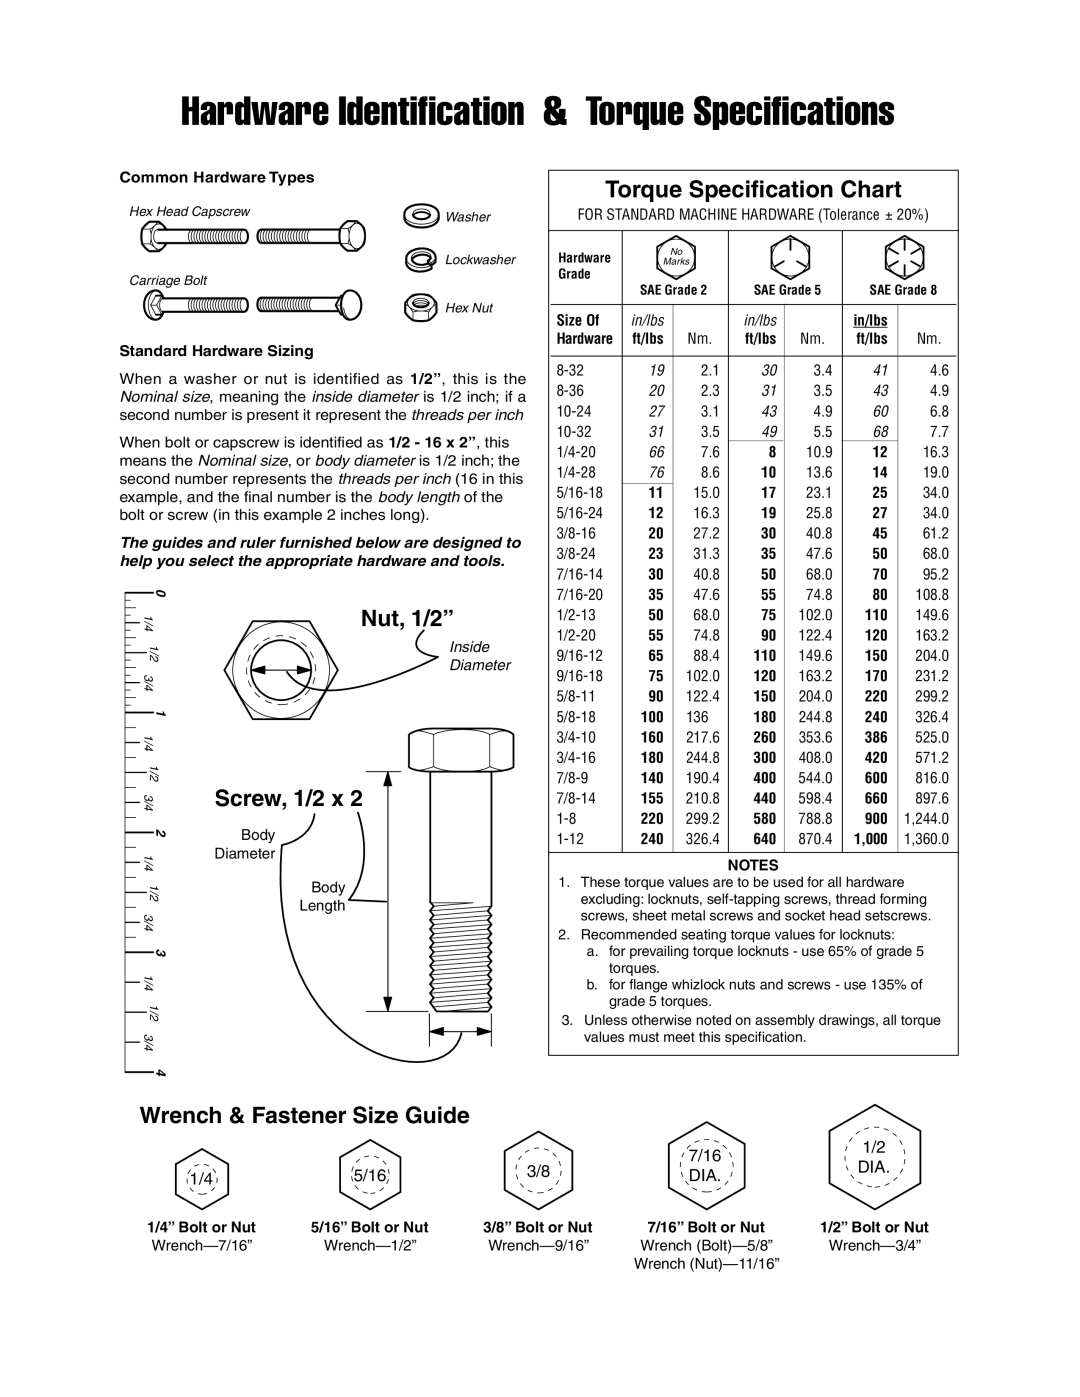 Simplicity 1694551 Wrench & Fastener Size Guide, Common Hardware Types, Standard Hardware Sizing, 1/4” Bolt or Nut, 7/16 